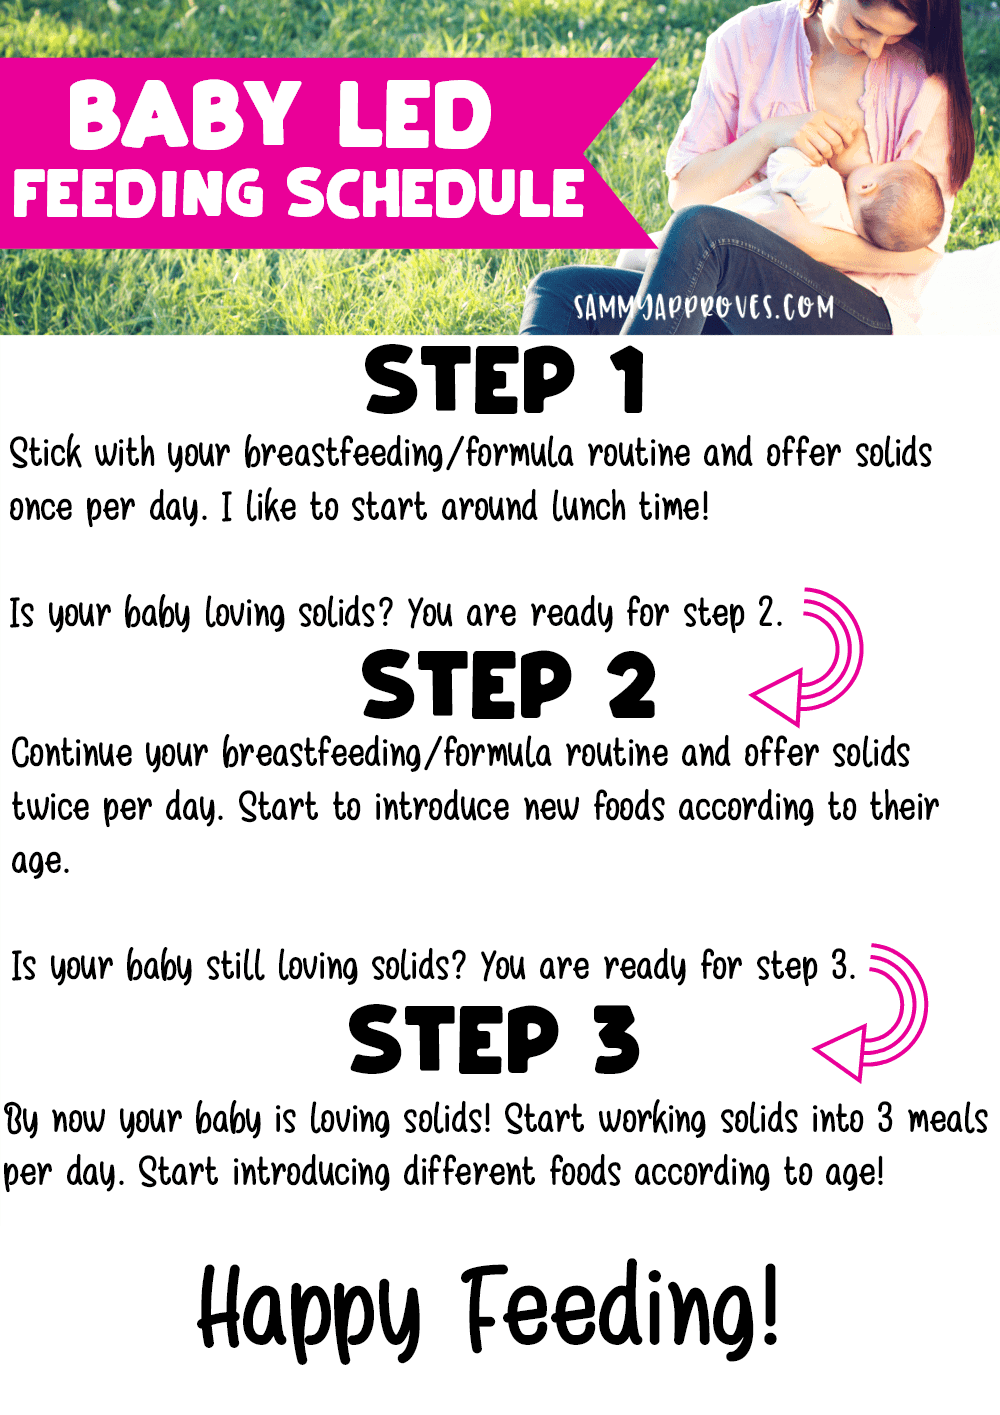 How to Create a Baby Led Feeding Schedule | Starting Solids 6-12 Months